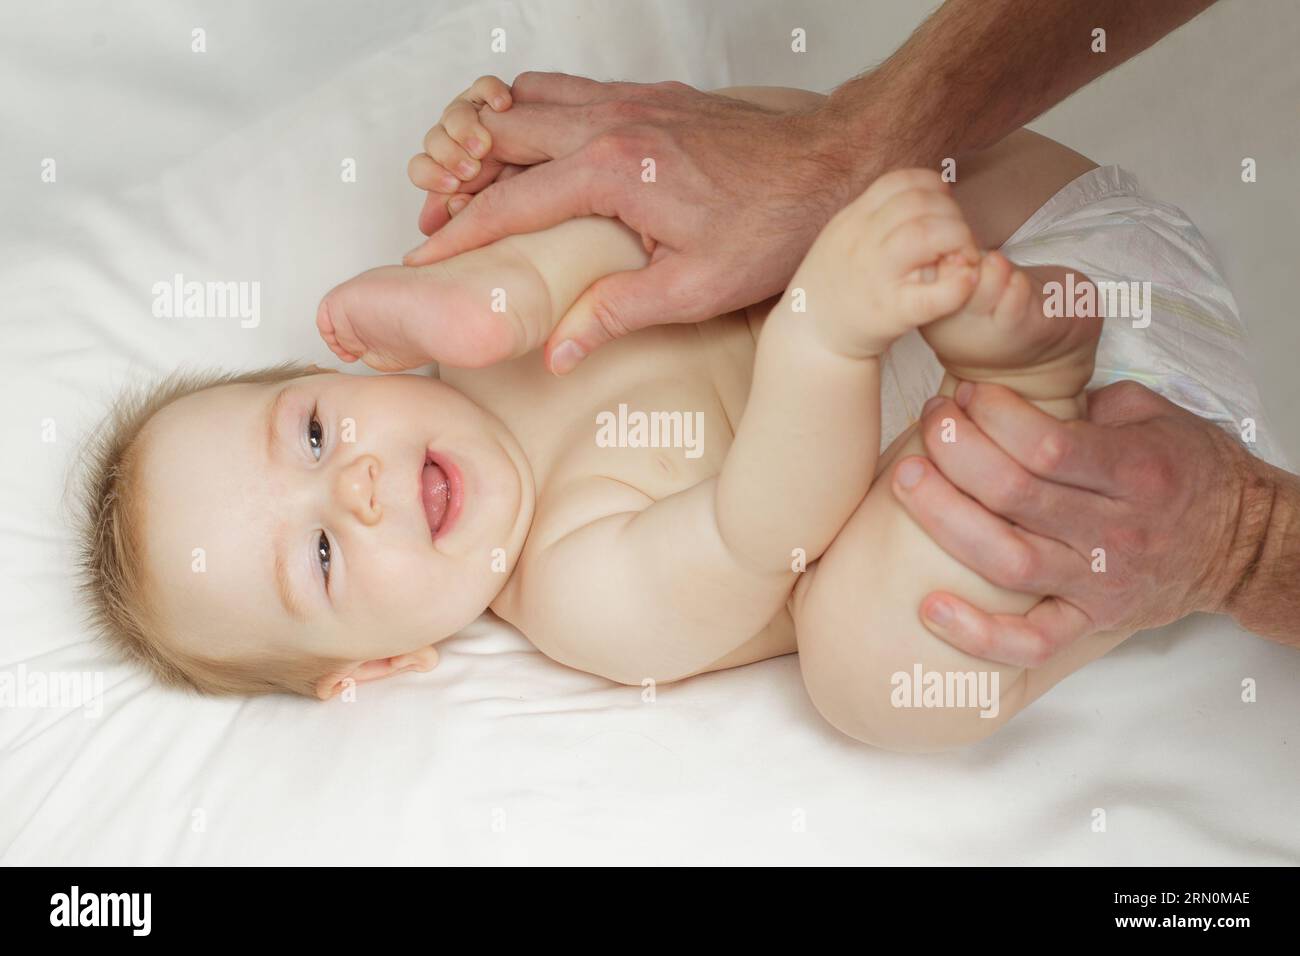 Smiling kid lying, playing, wearing diaper at home. Stock Photo